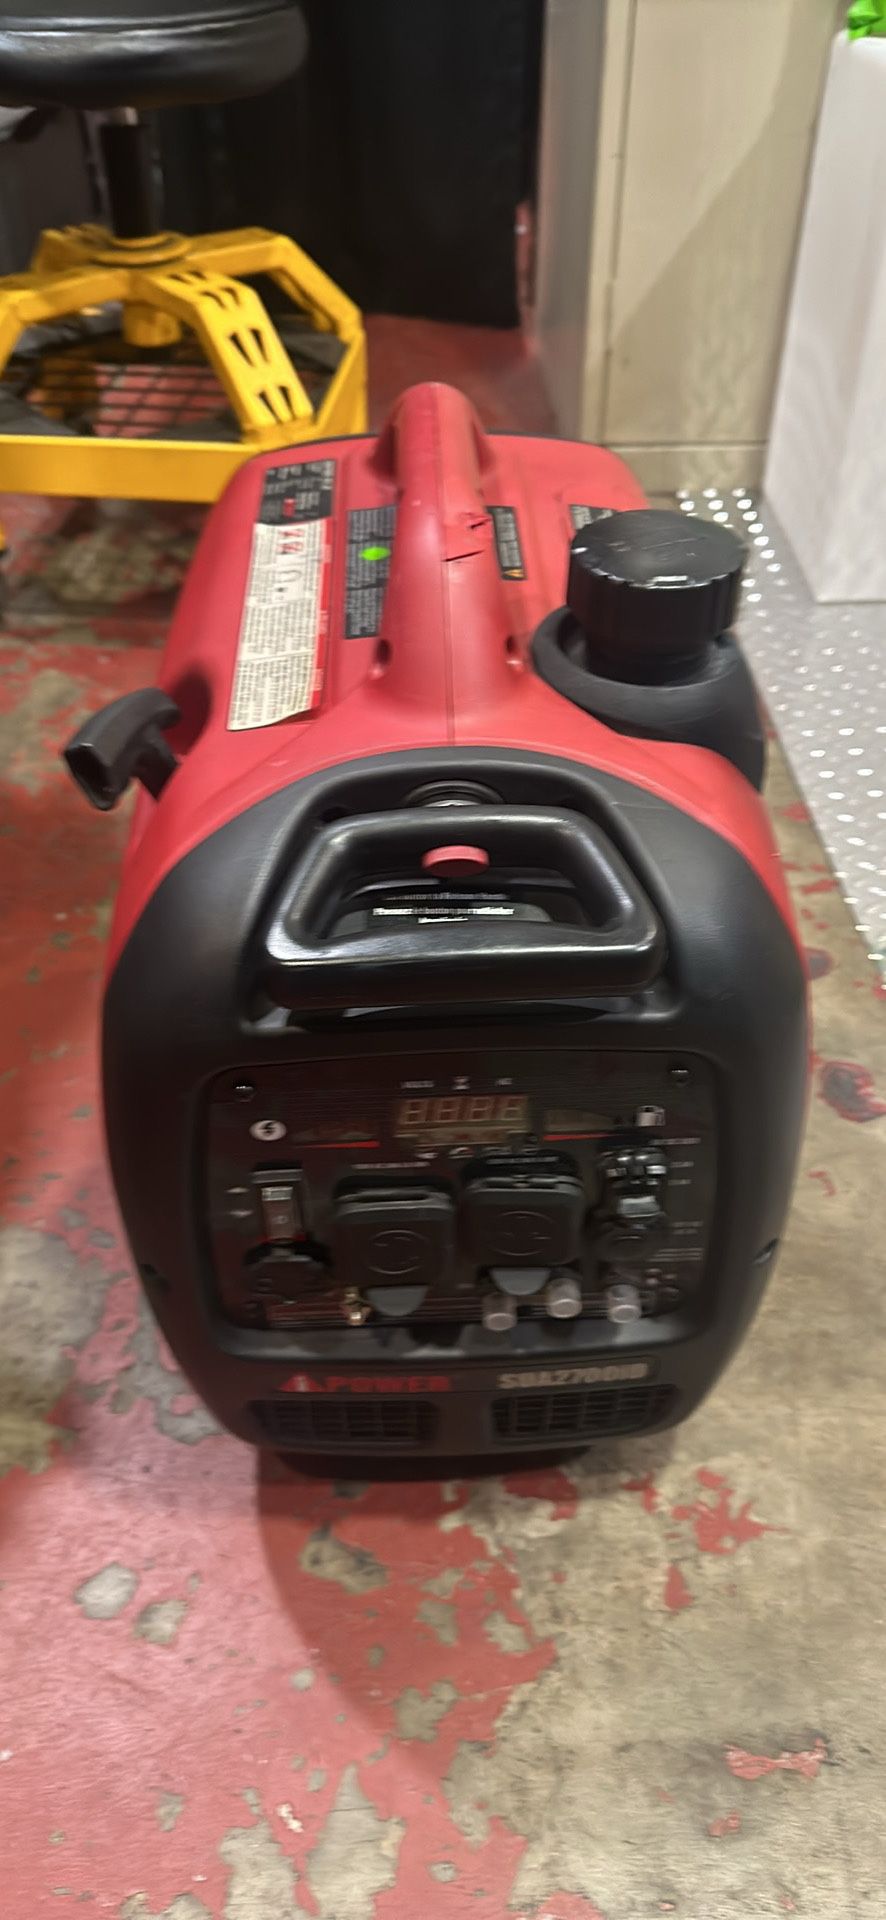 ipower 2700 watts dual fuel inverter generator ultra quite only asking $580 (financing available)